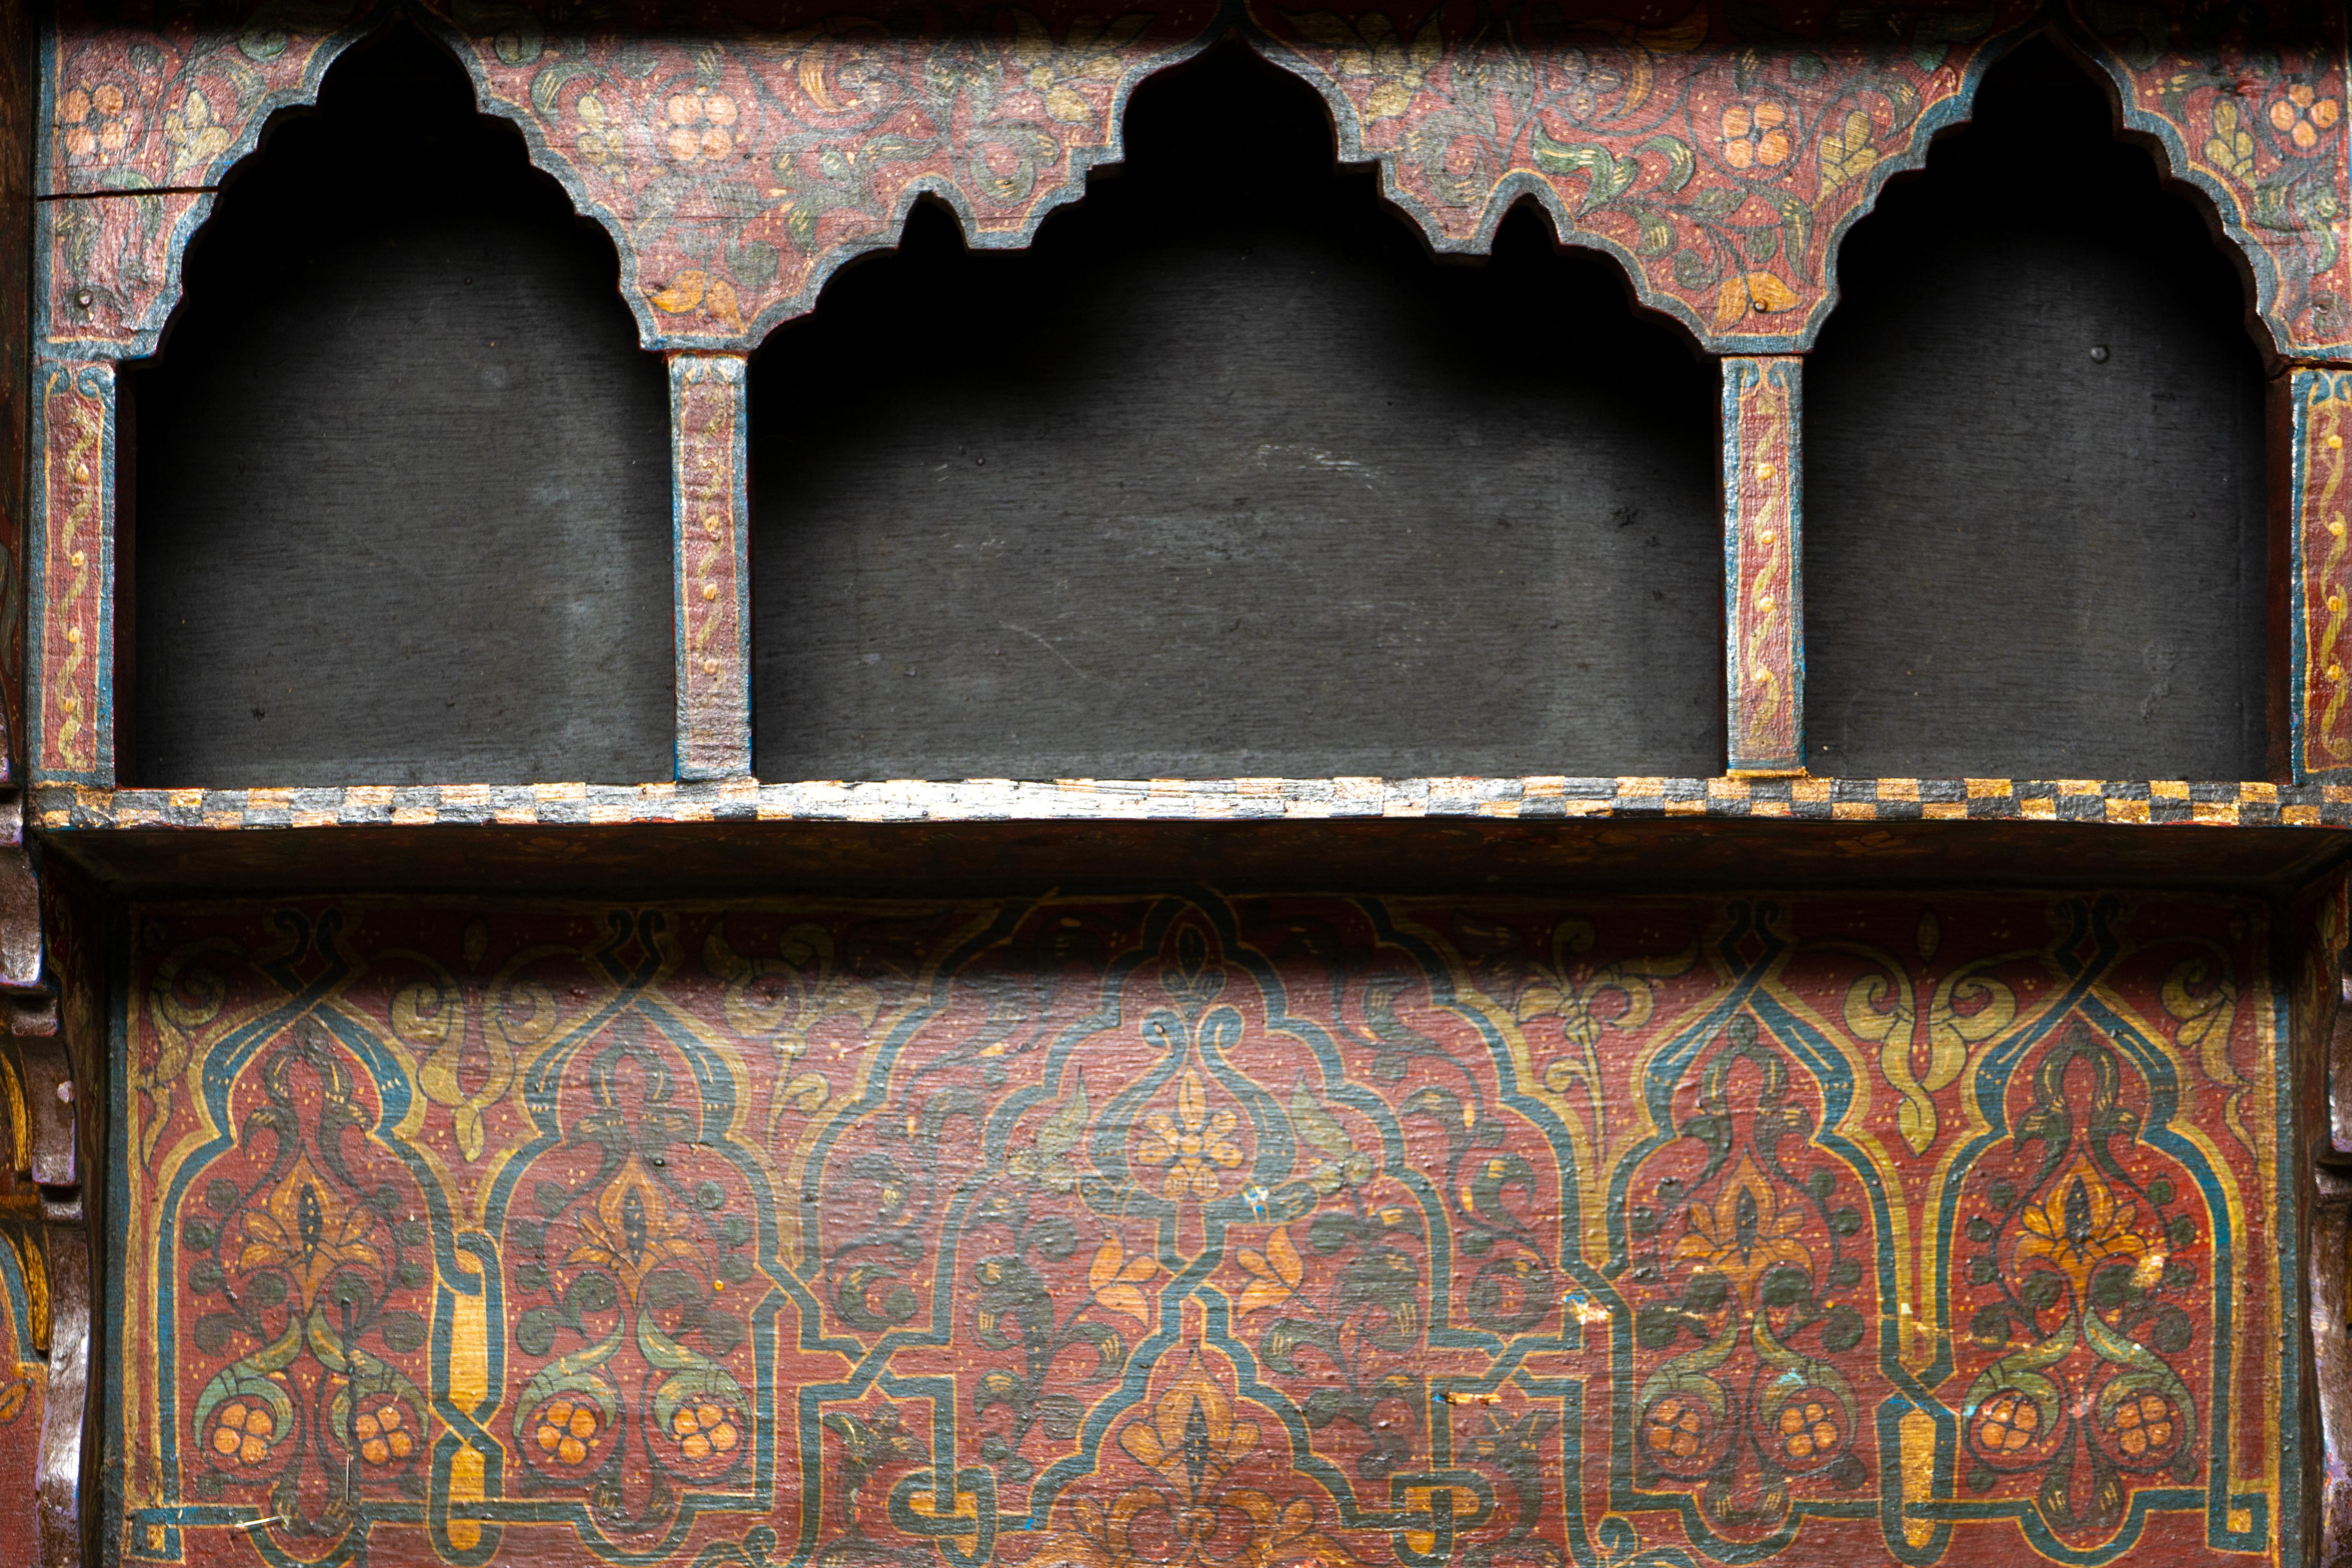 Moroccan painted wall shelf

Measures: 32